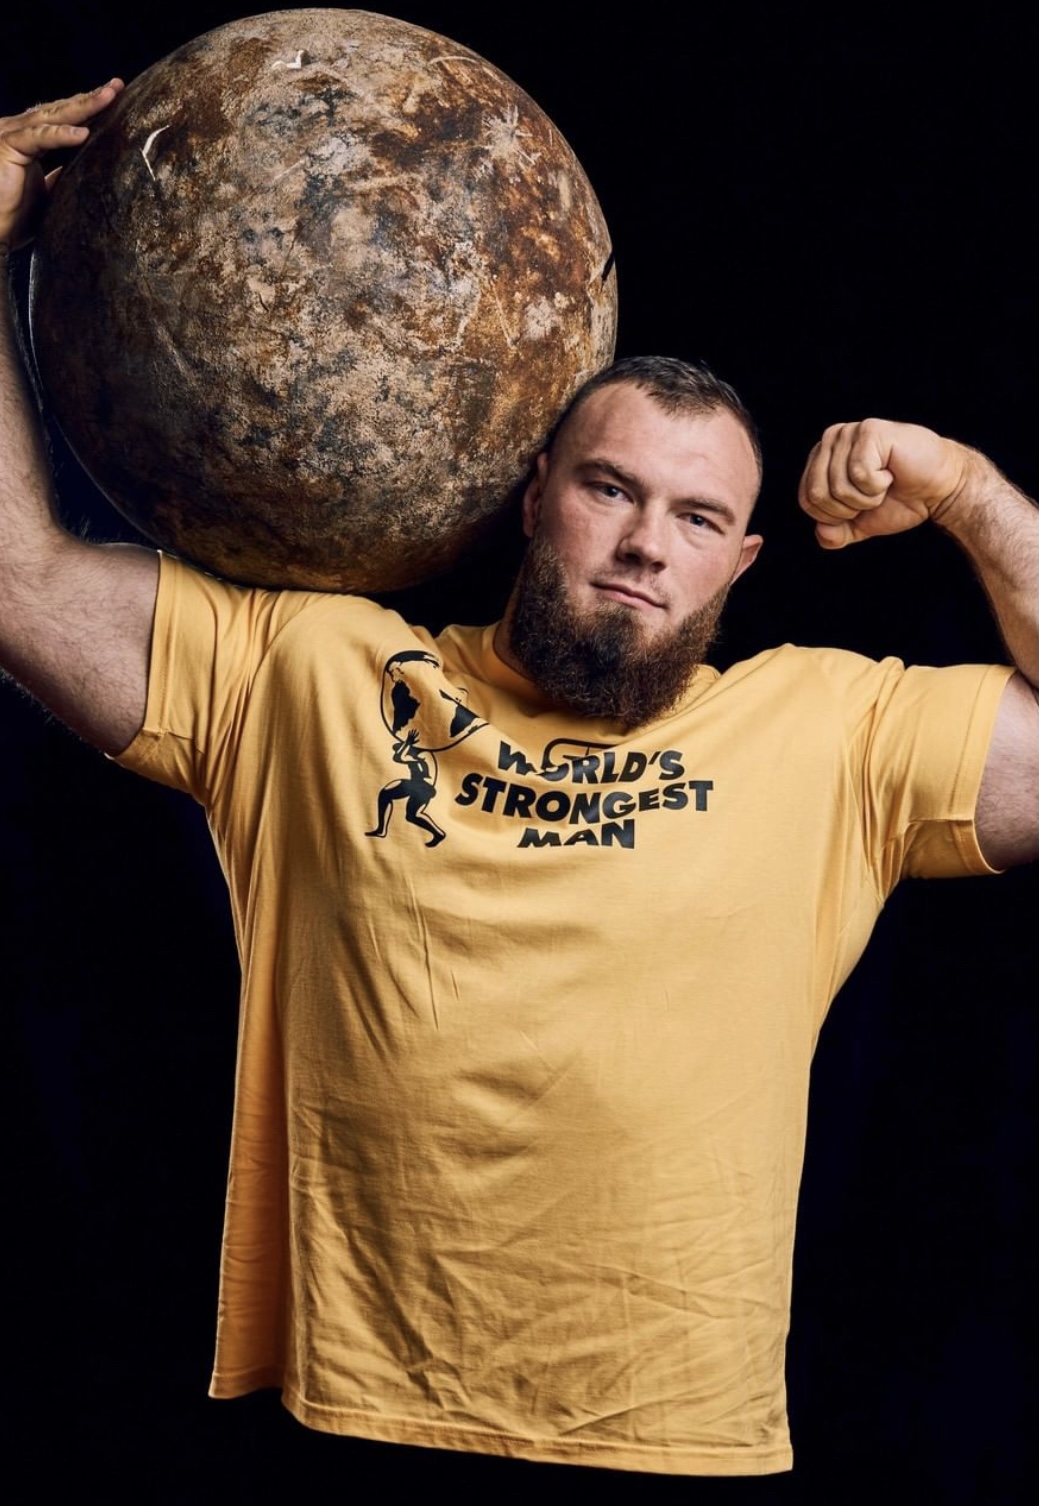 How To Watch The 2021 World’s Strongest Man MuscleChemistry